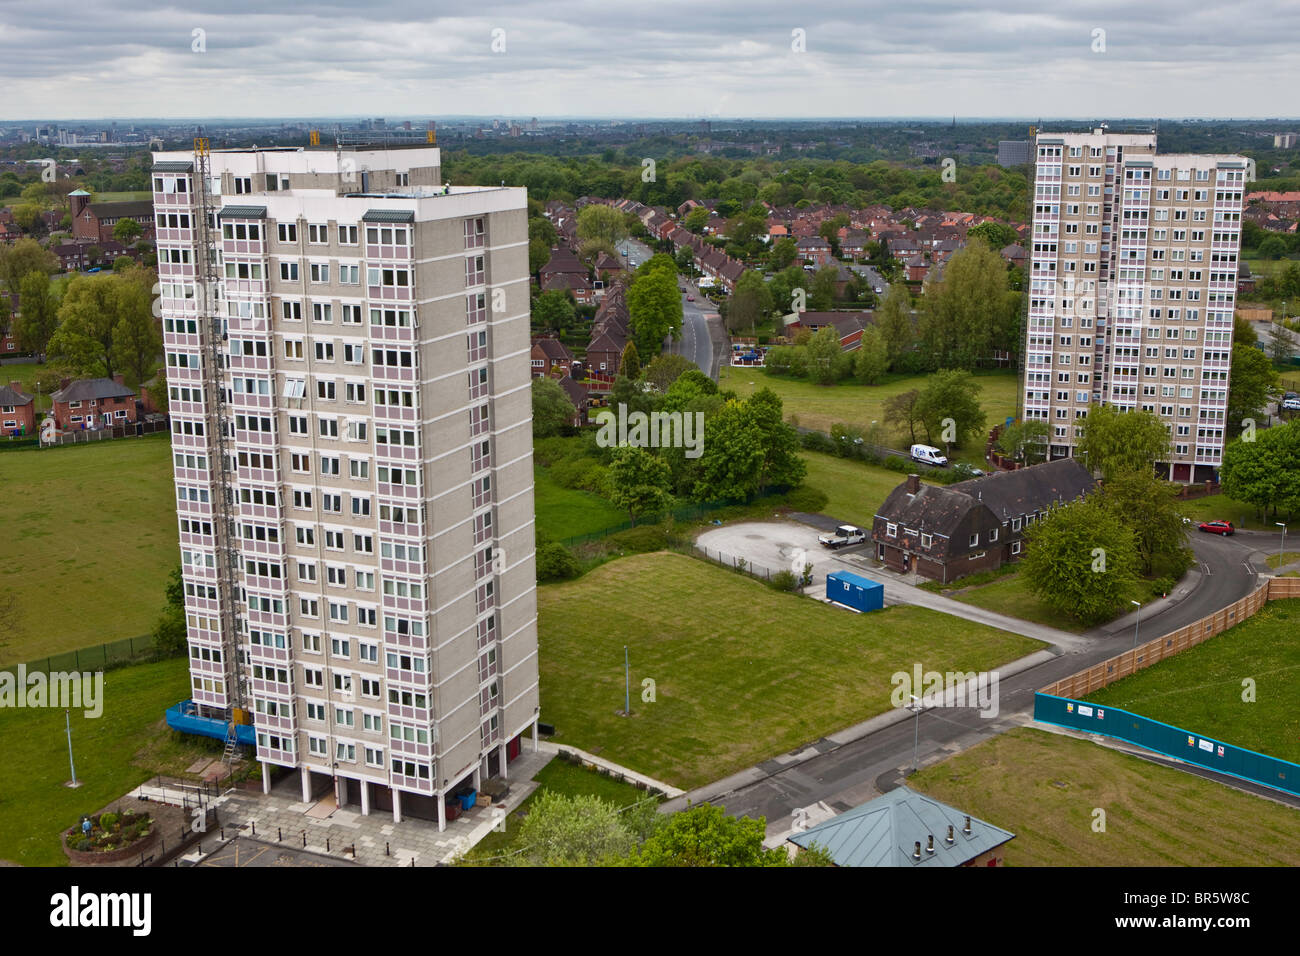 Kentmere Court, a high-rise tower block housing estate in the Charlestown area of Manchester. Stock Photo